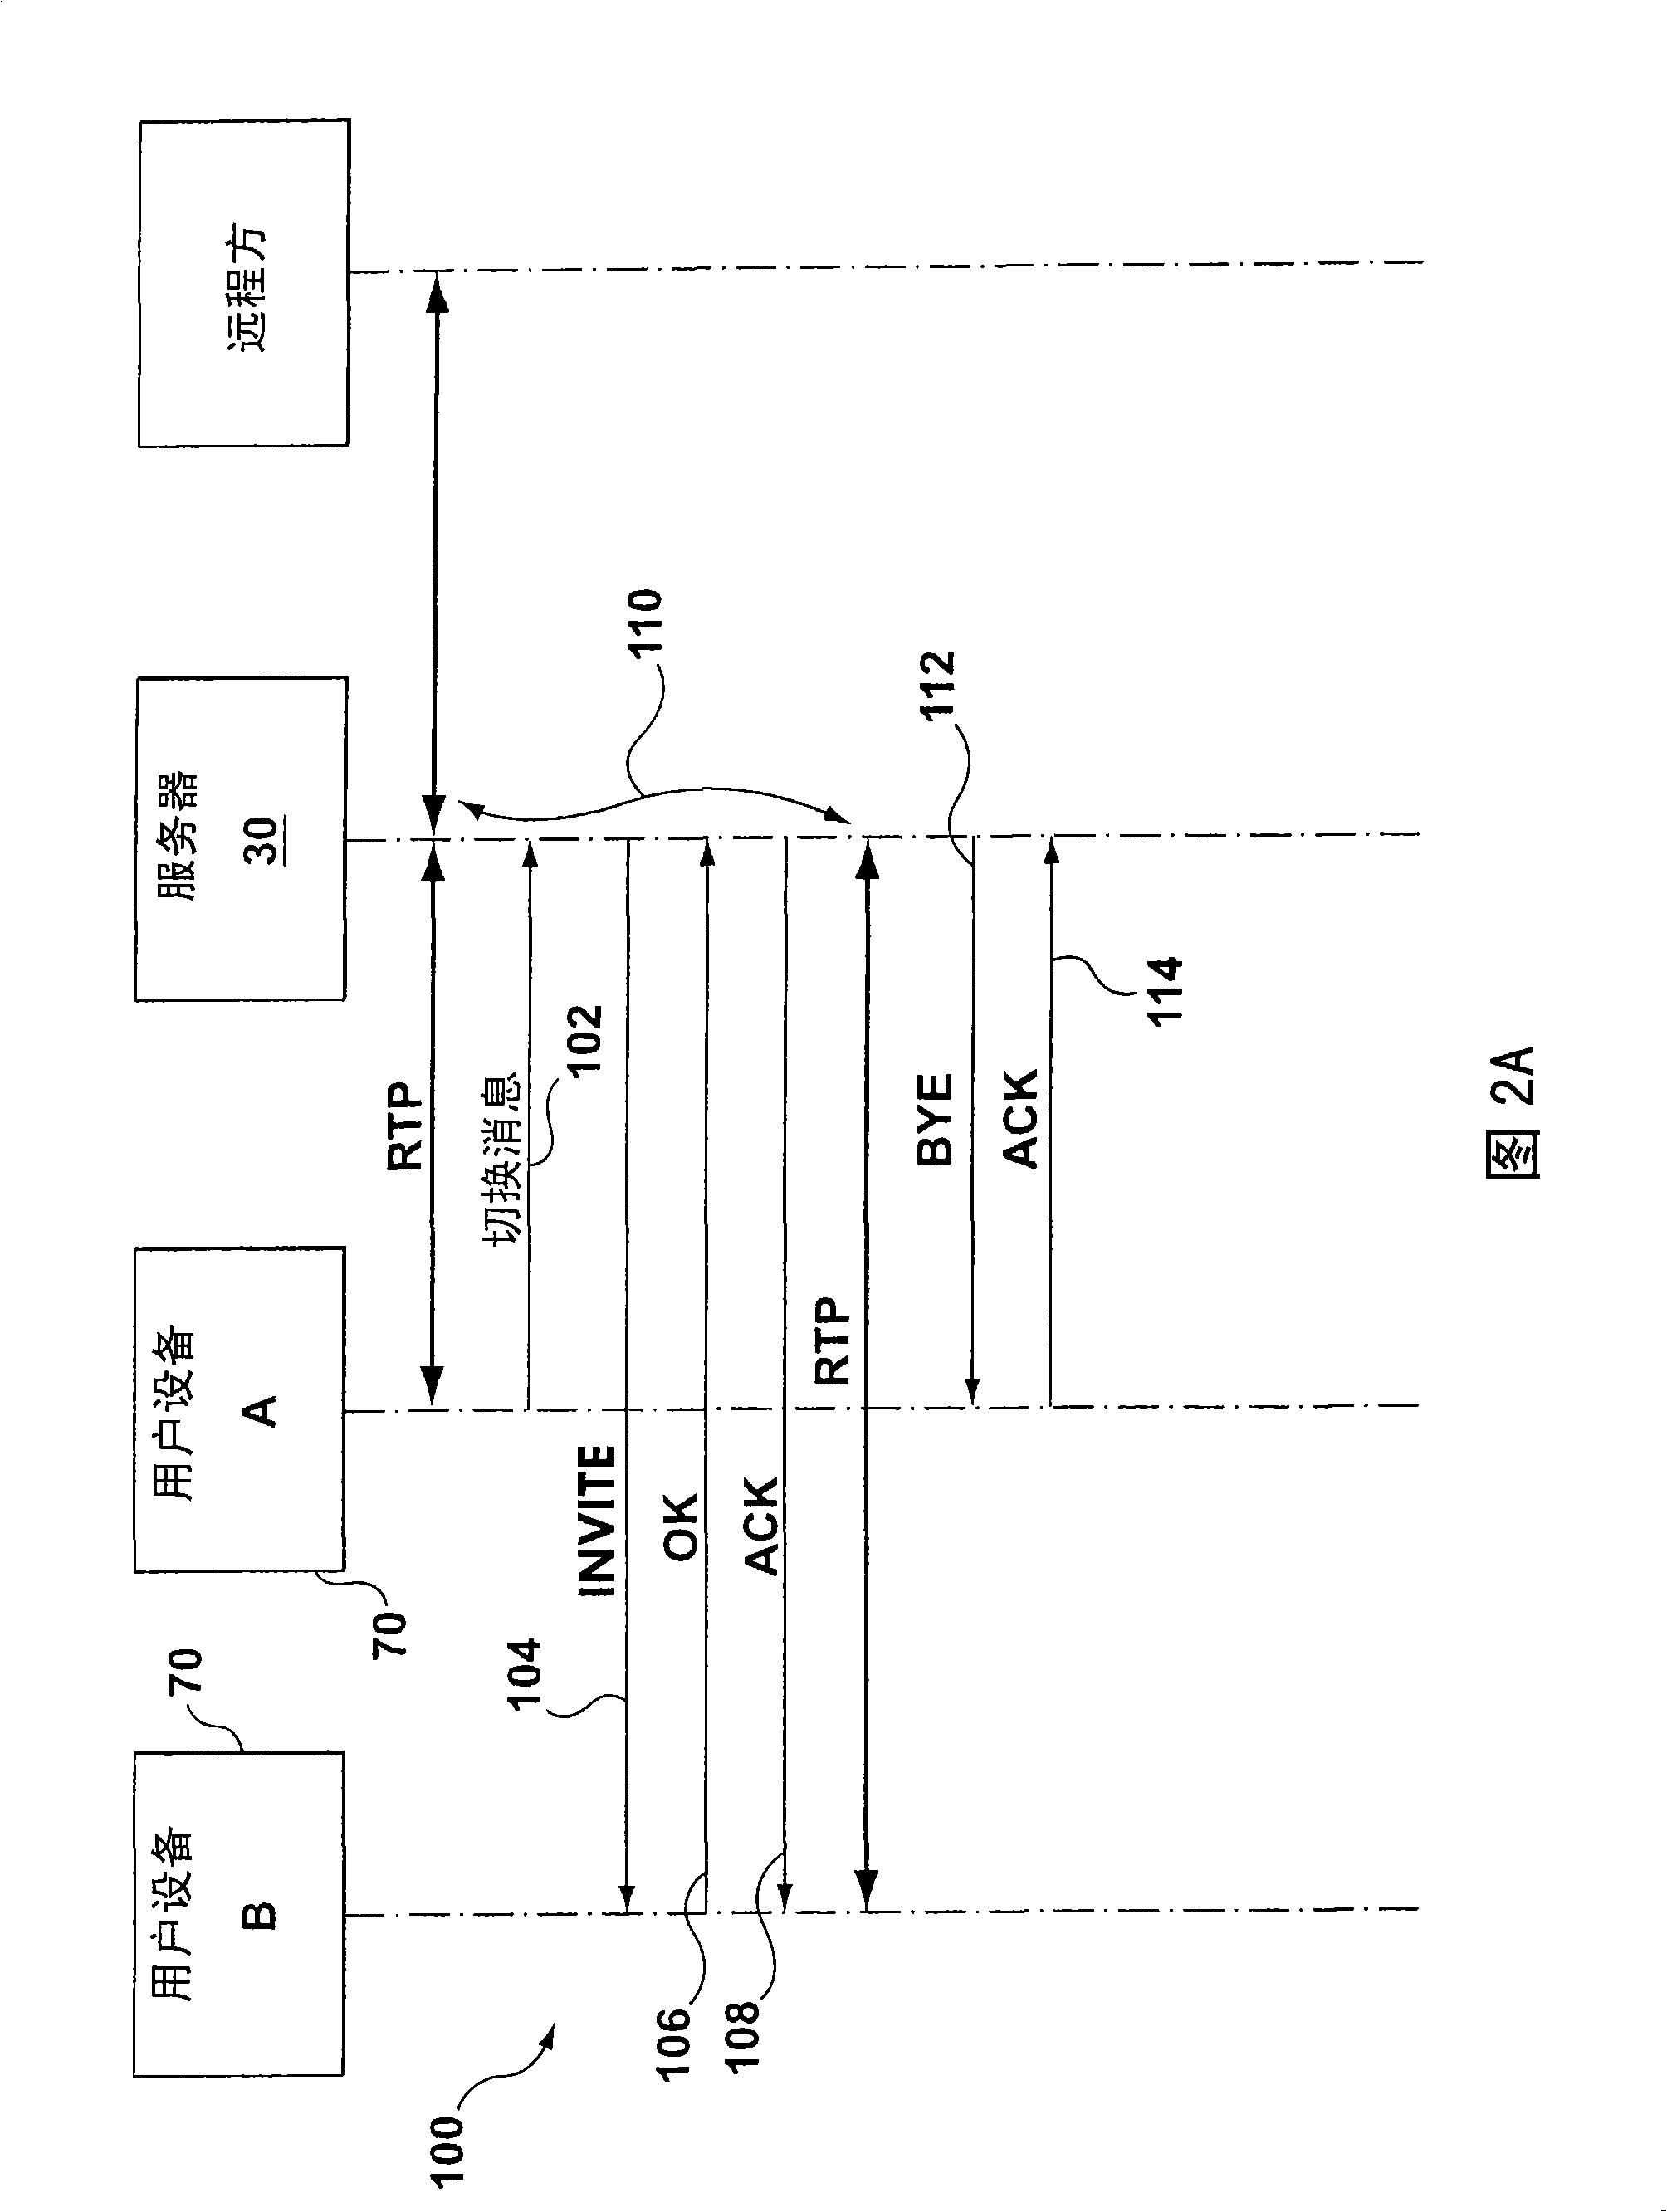 Methods and systems for facilitating transfer of sessions between user devices